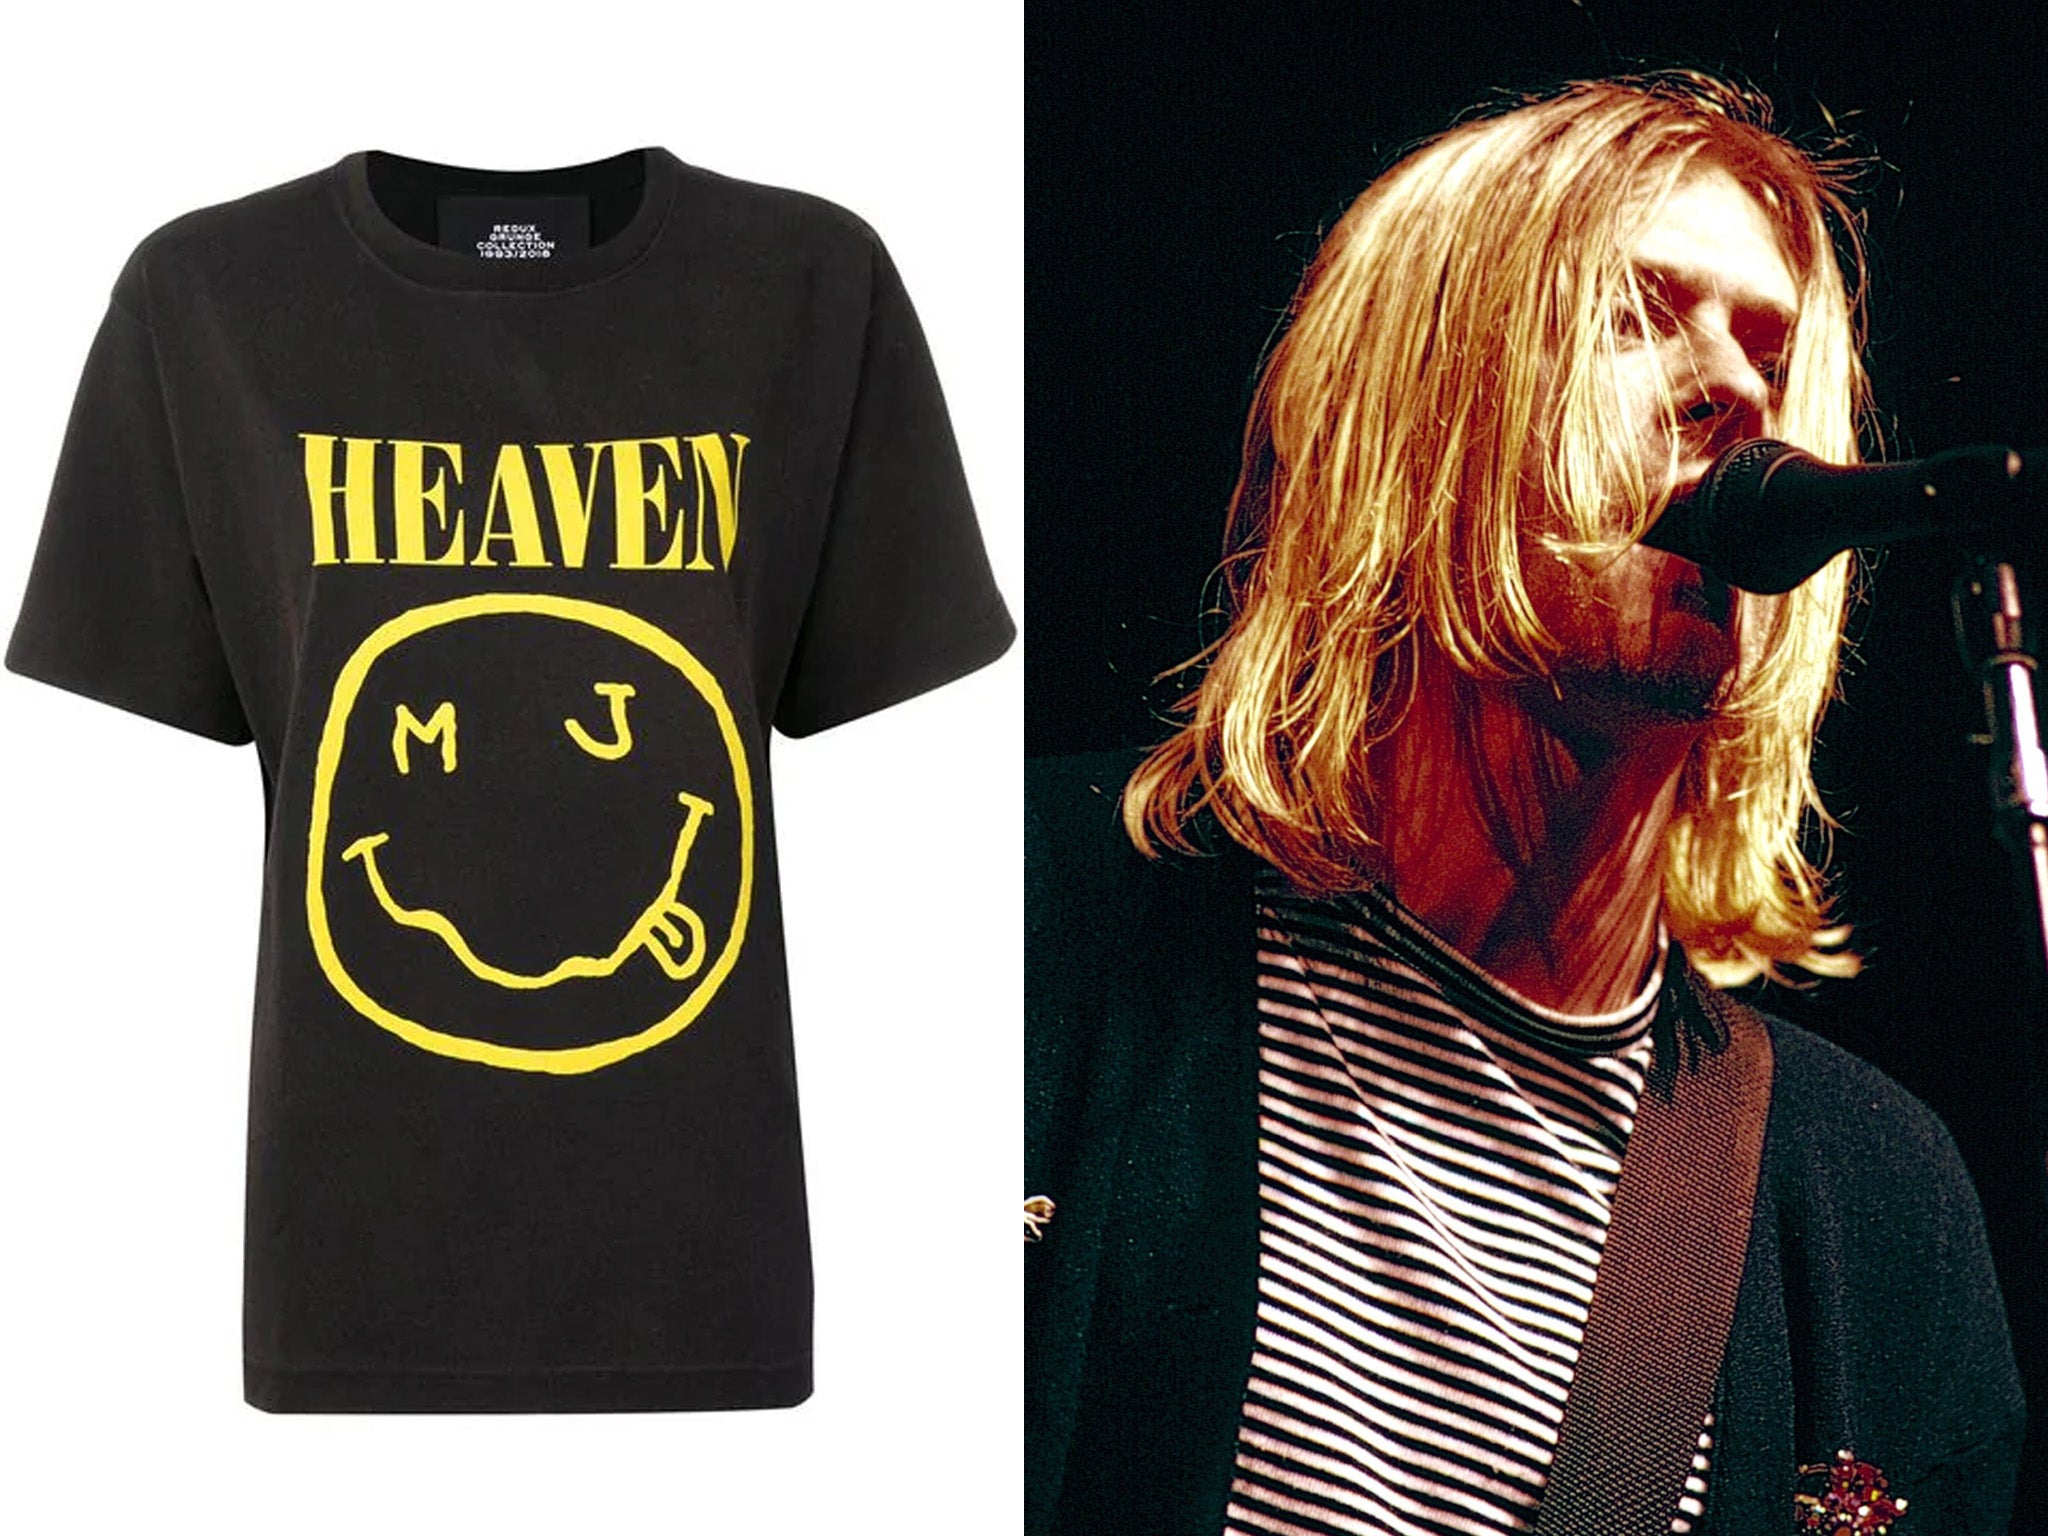 Marc Jacobs Denies Stealing Nirvana Happy Face Logo On T Shirt Amid Lawsuit Controversy The Independent The Independent